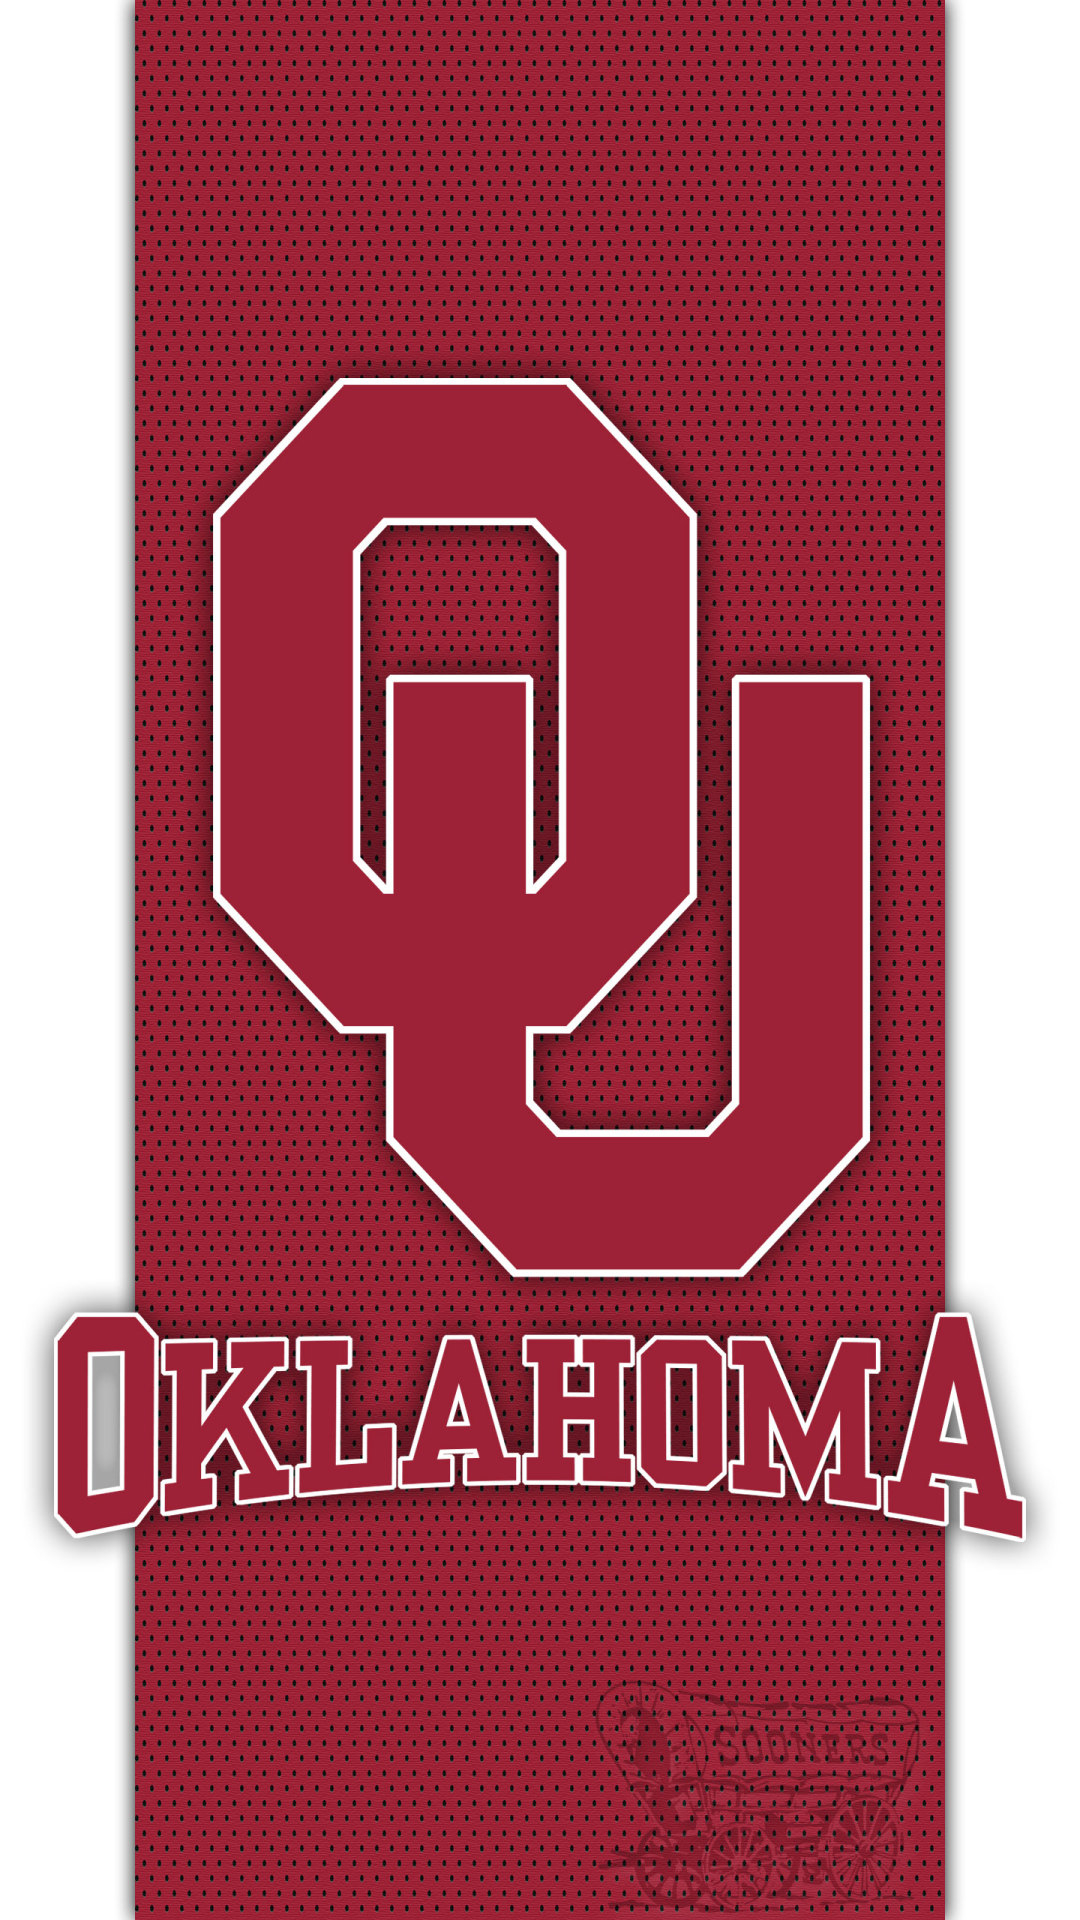 1080x1920 Ou Football Wallpaper posted by Michelle Peltier